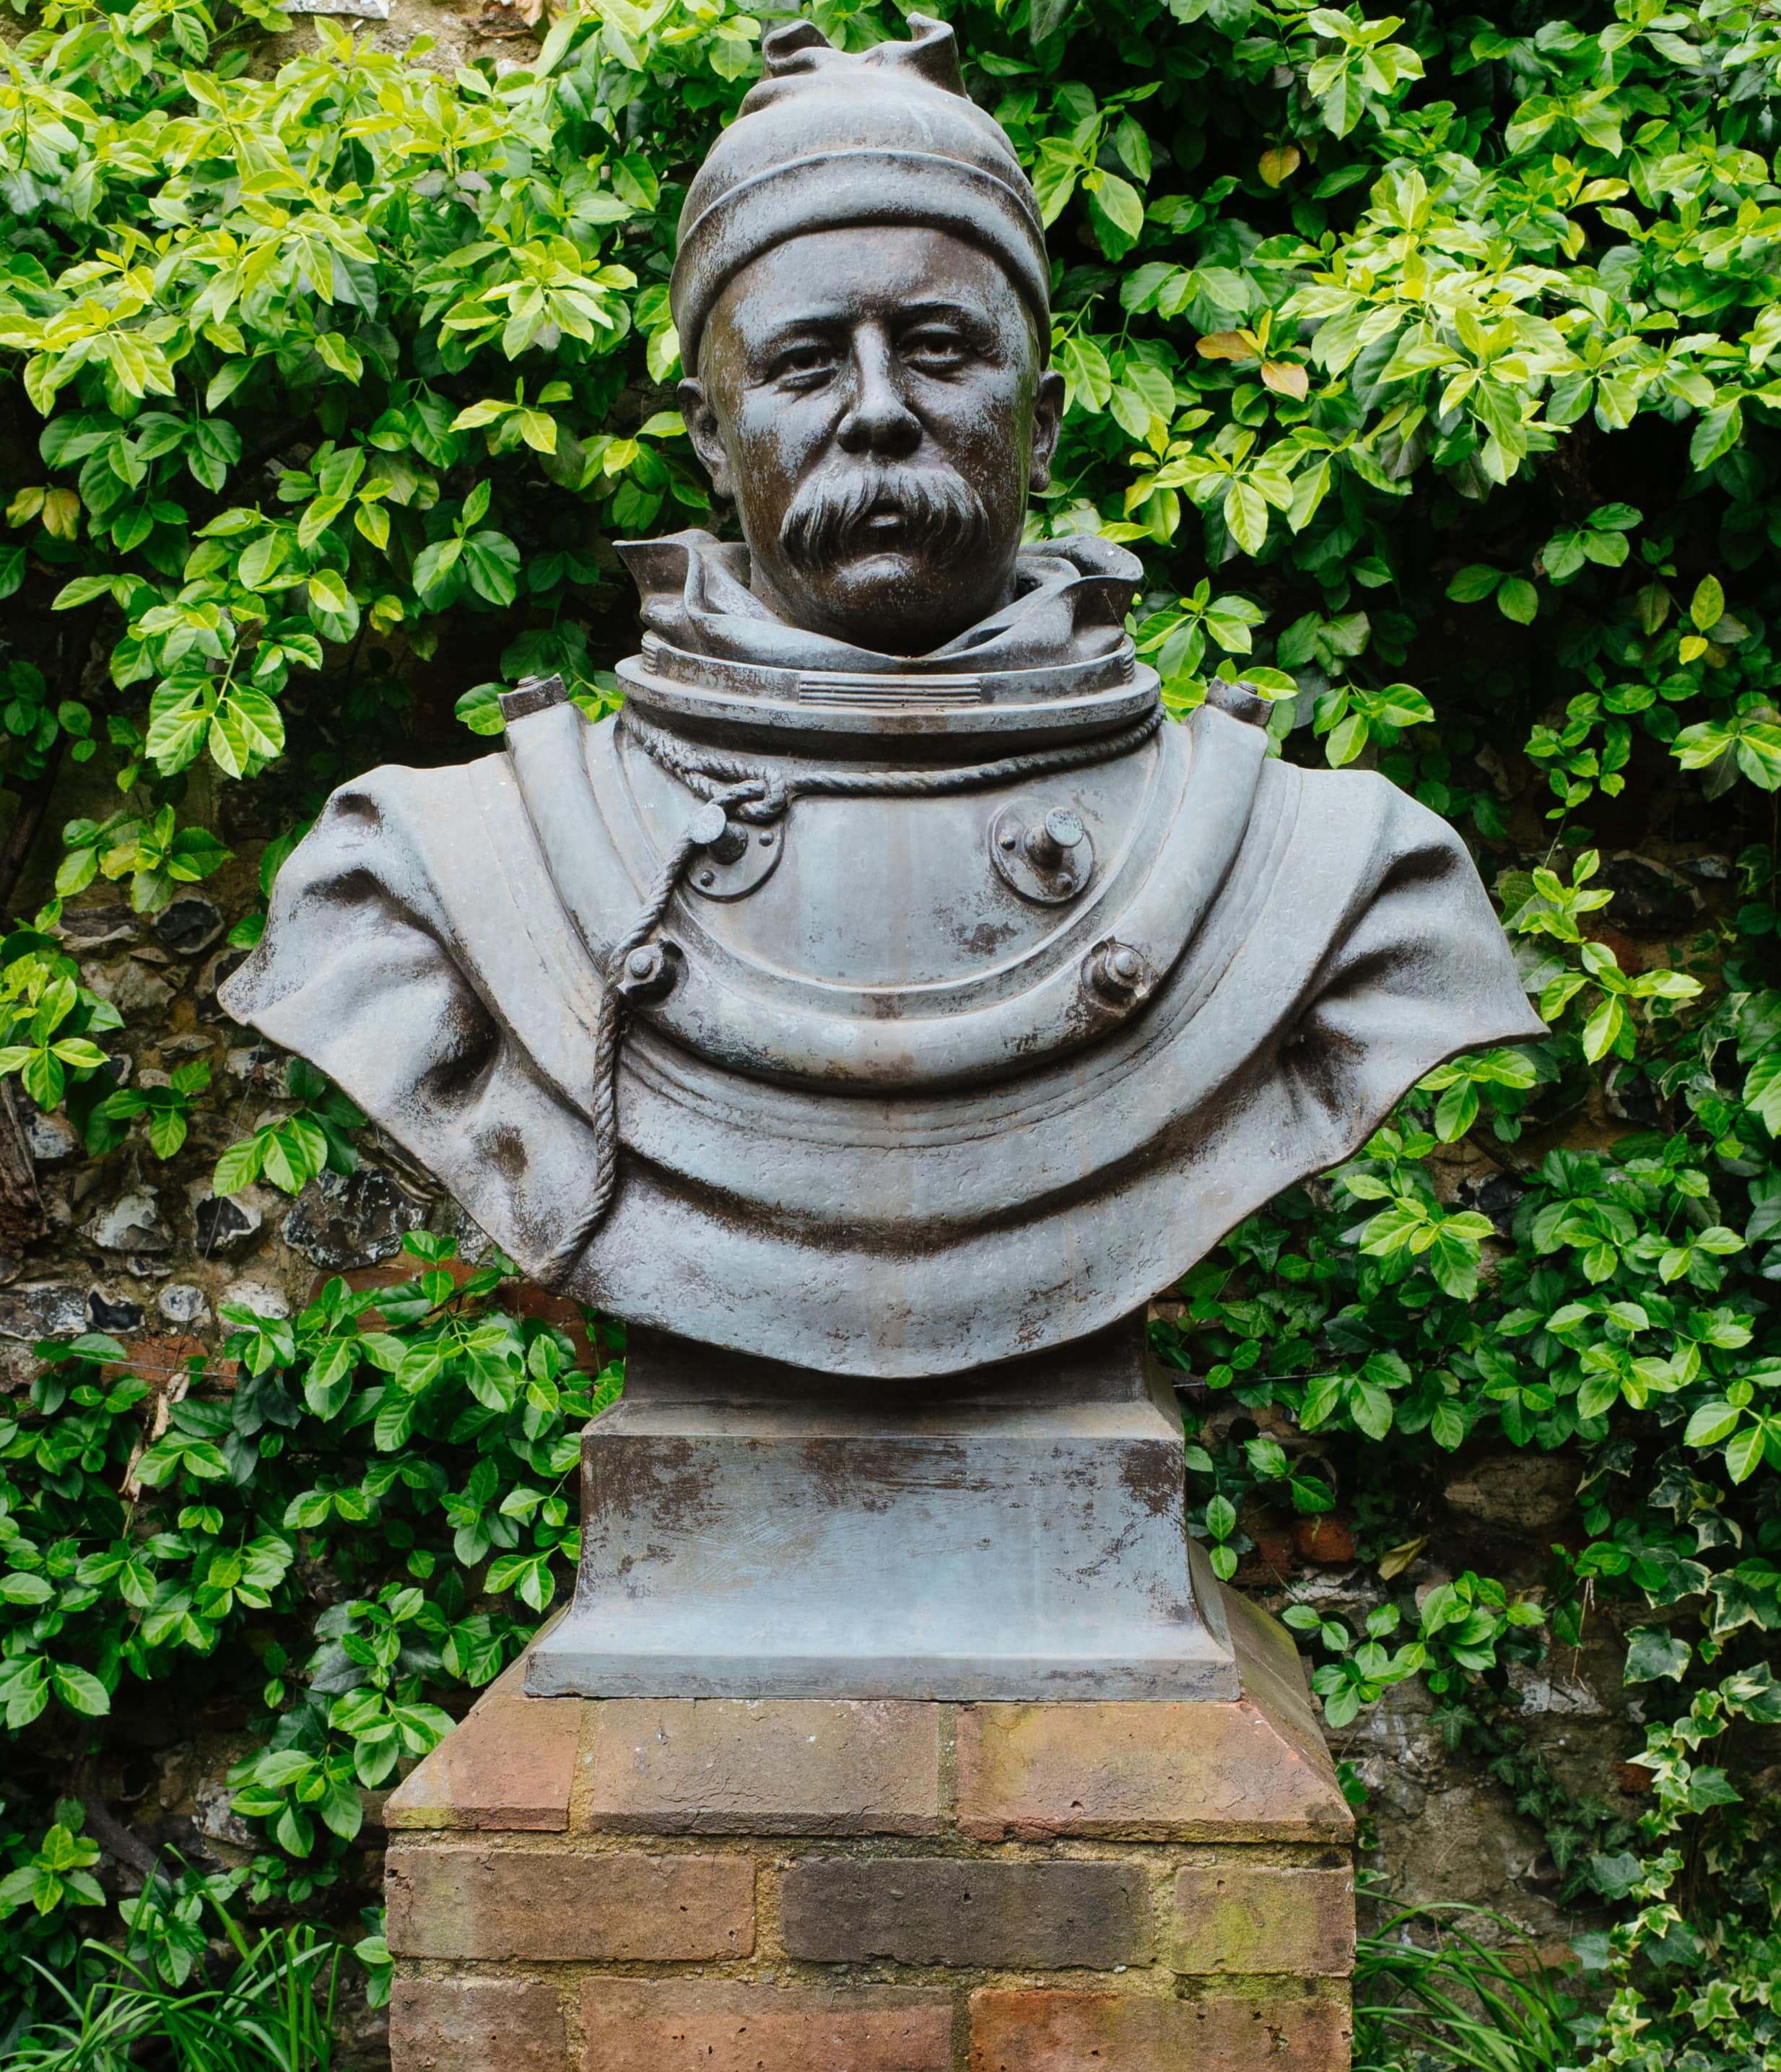 The bronze bust of William Walker, the diver.